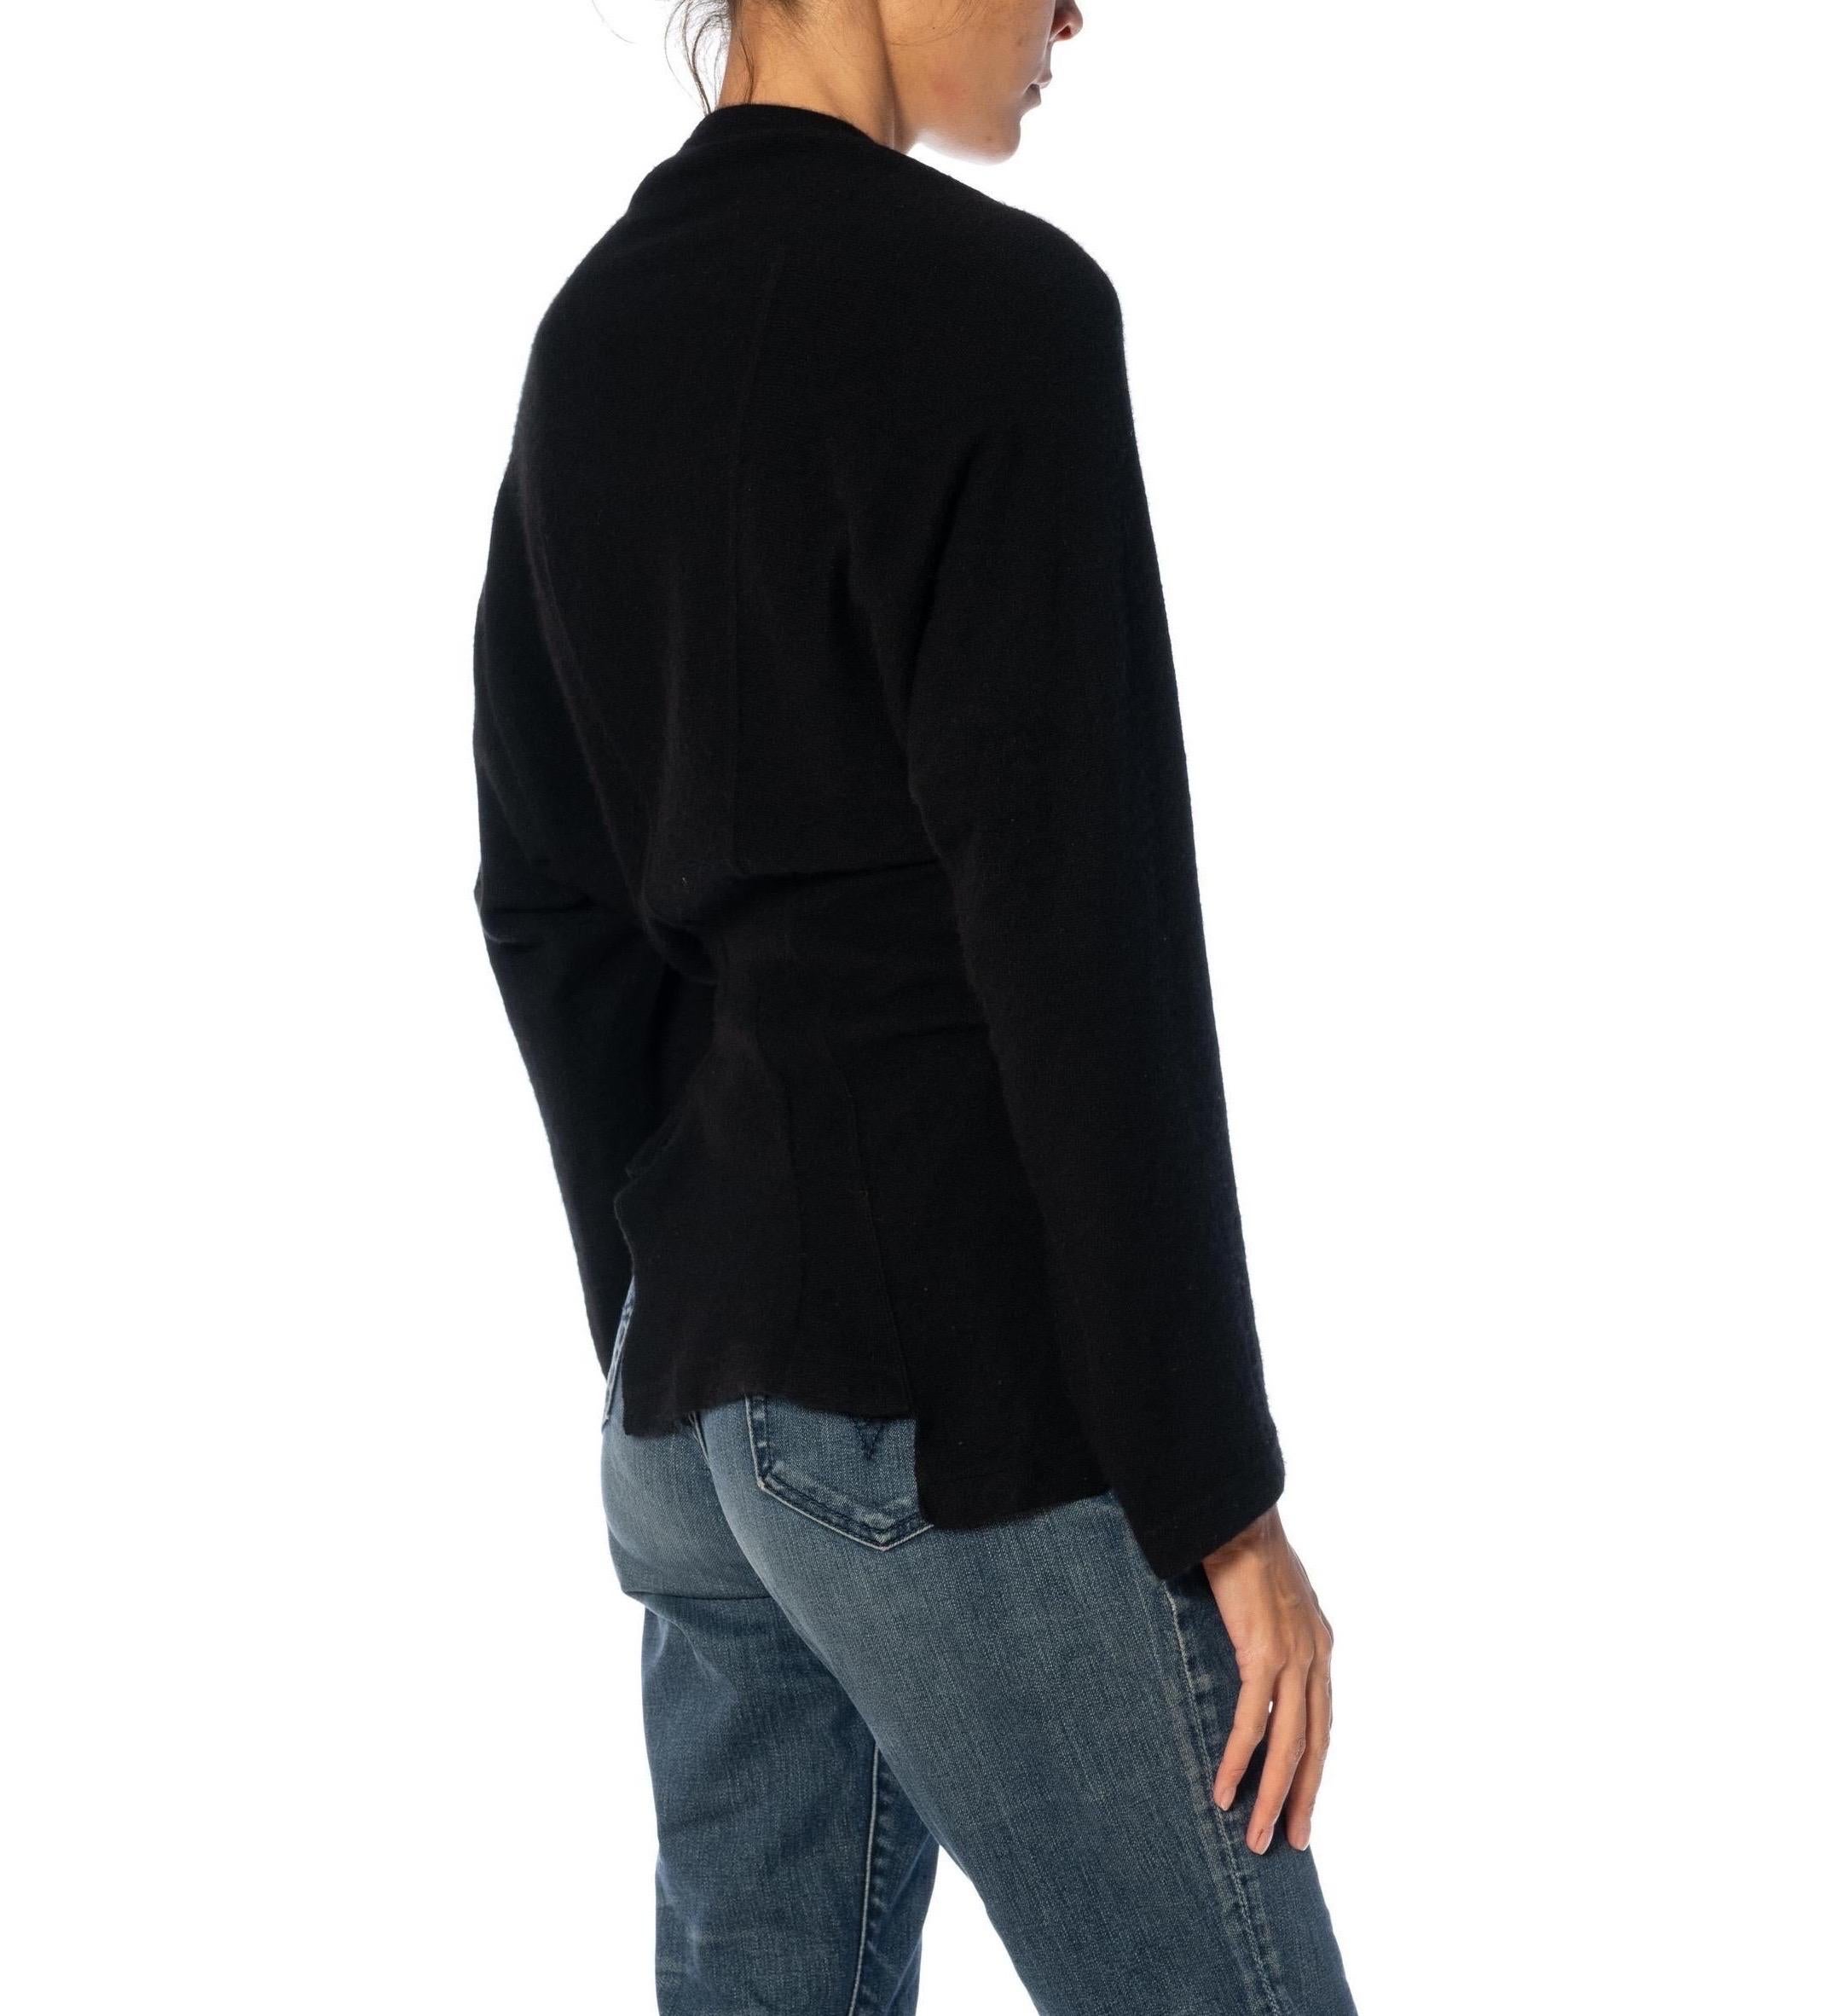 2000S COMME DES GARCONS Black Cashmere Asymmetrically Seamed Sweater 2004 For Sale 4